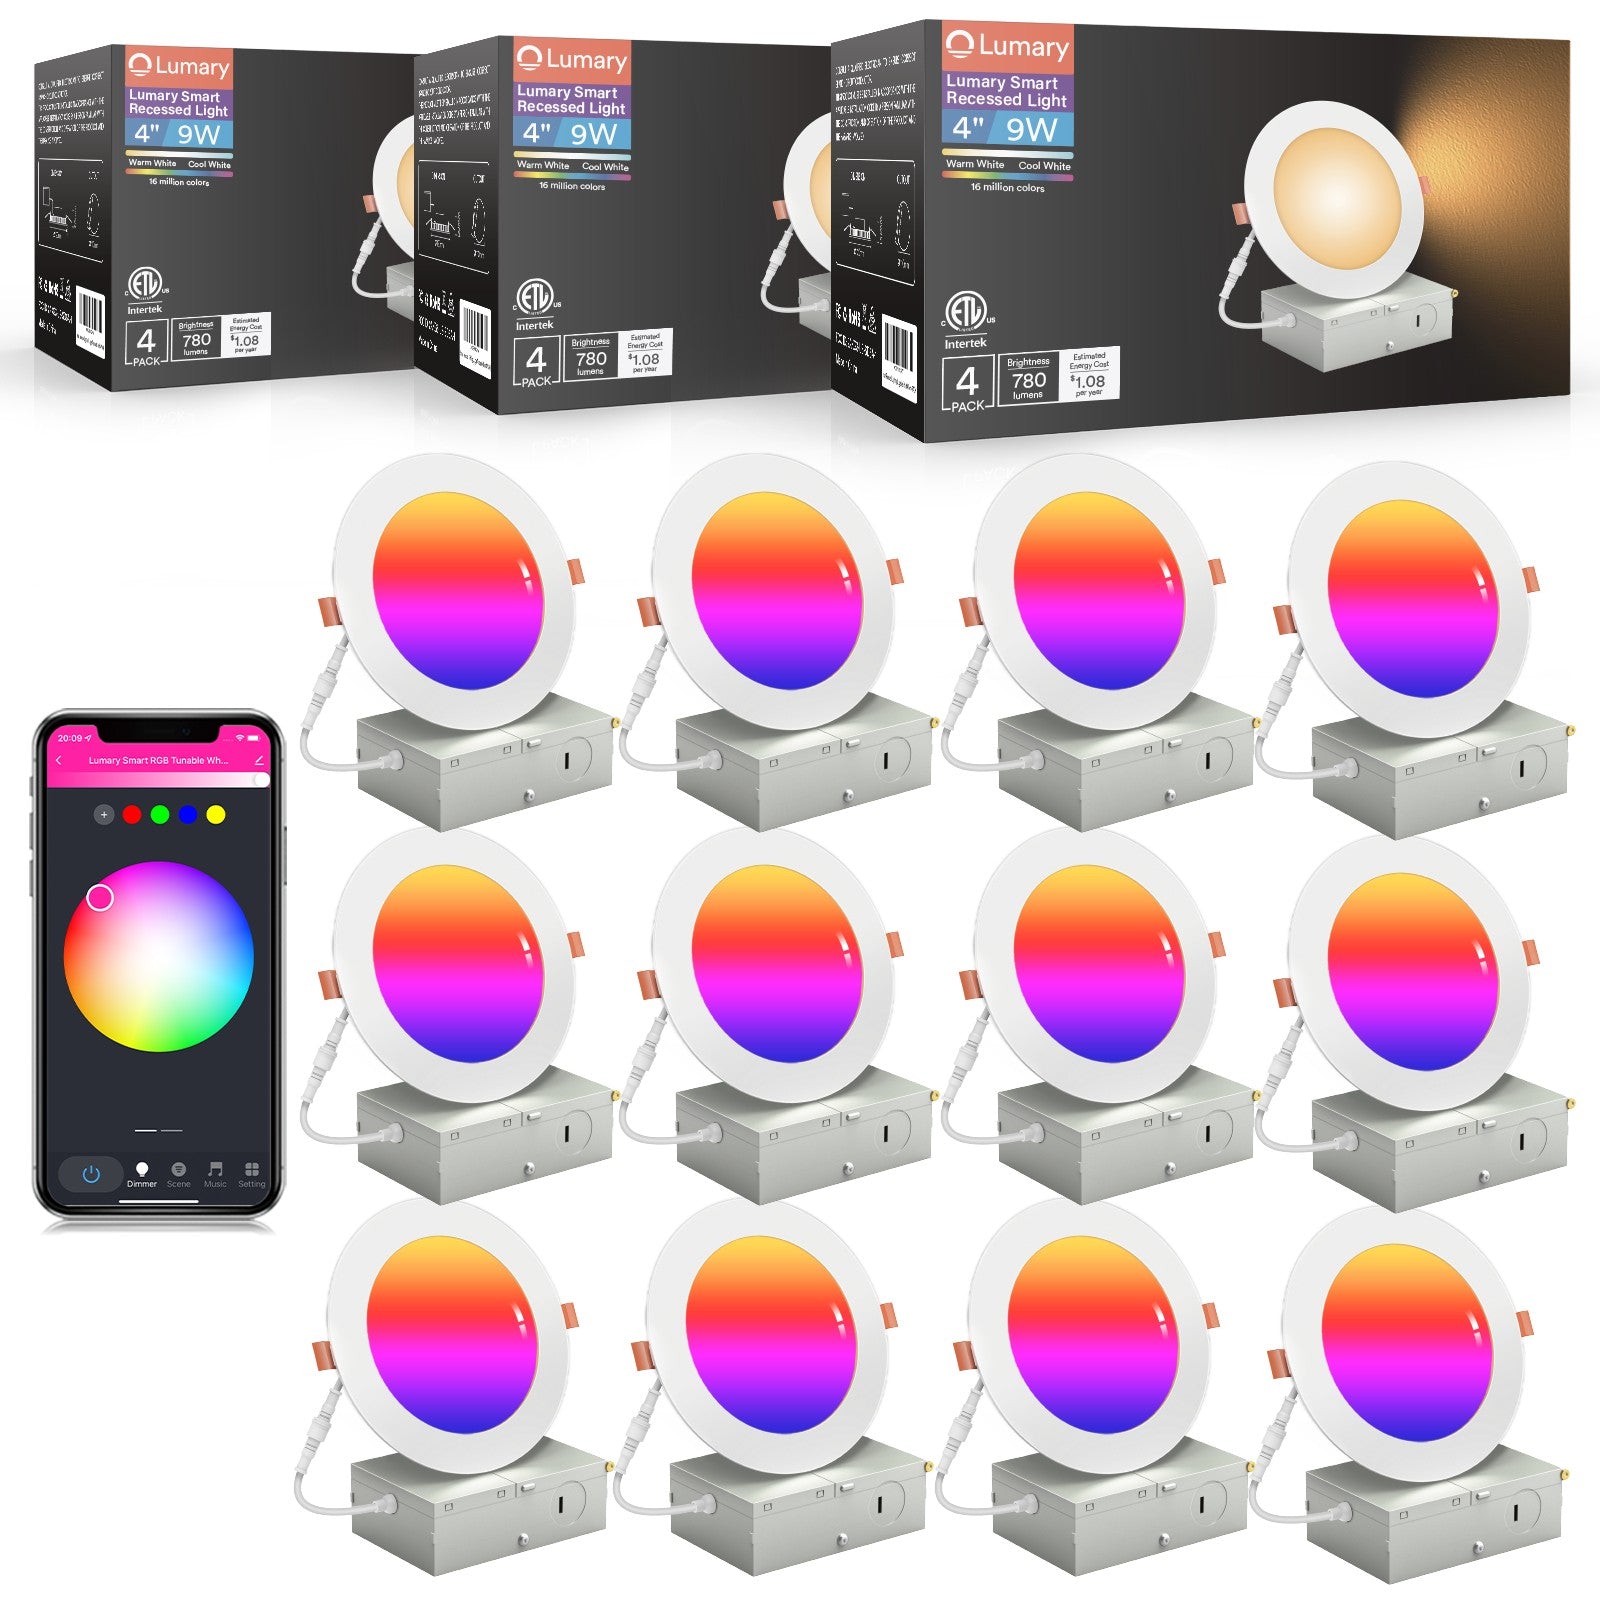 Full Color Wireless Wall Switch - Haven Lighting